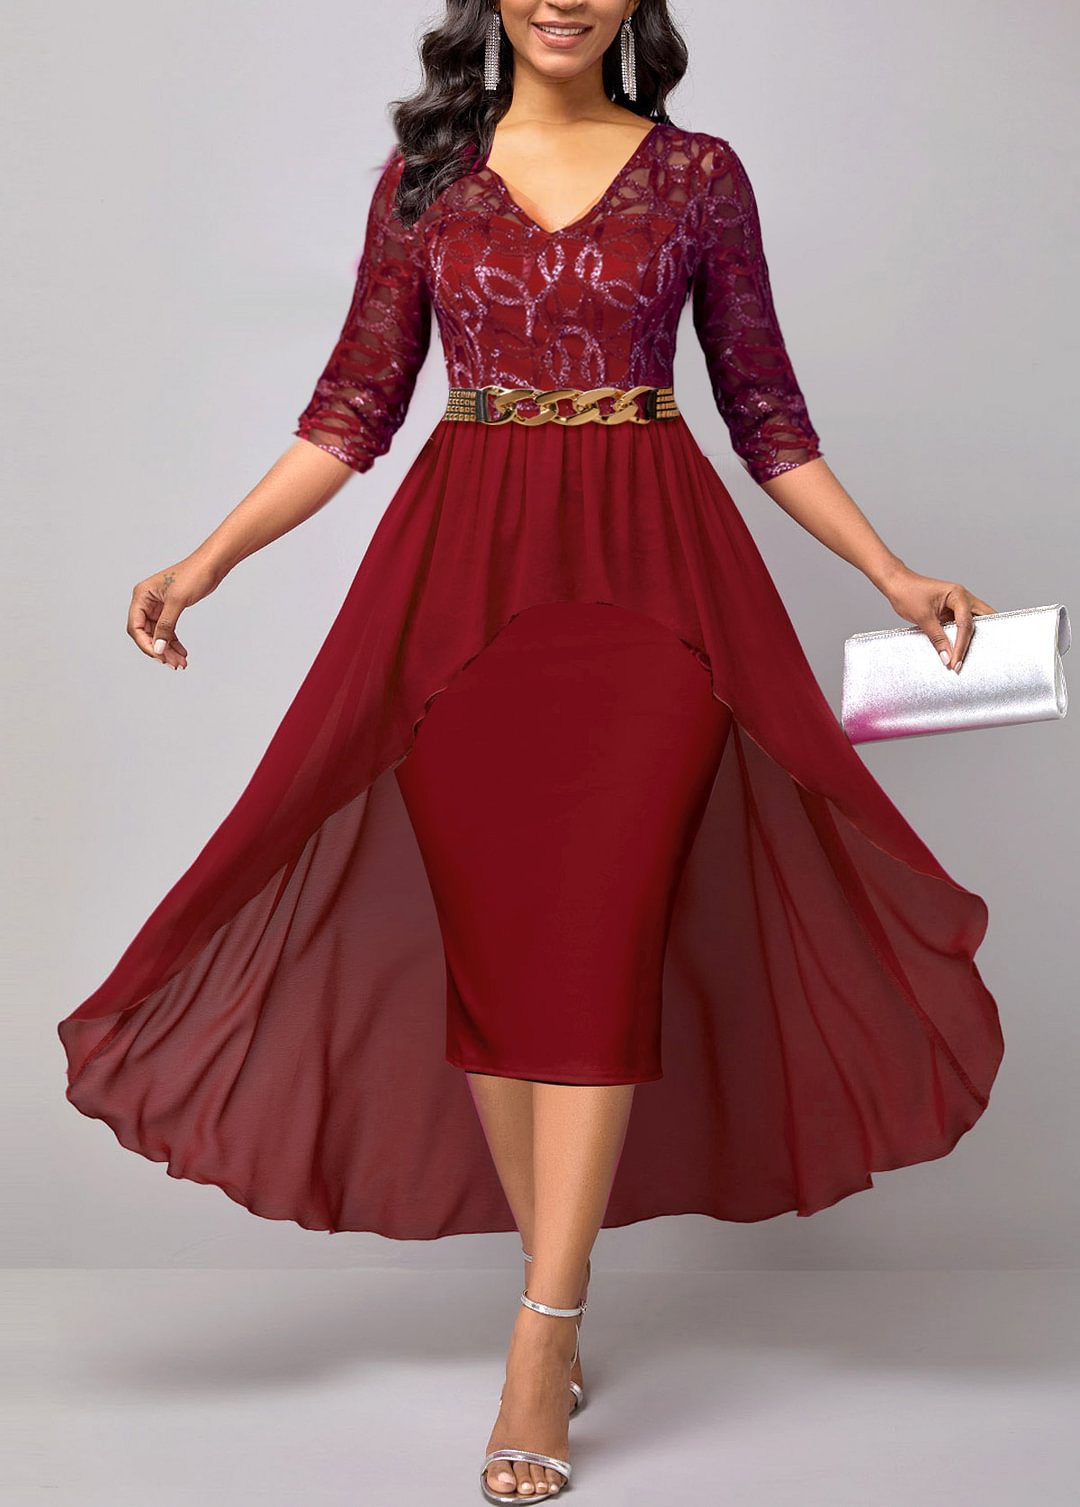 Lace Patchwork Wine Red 3/4 Sleeve Dress